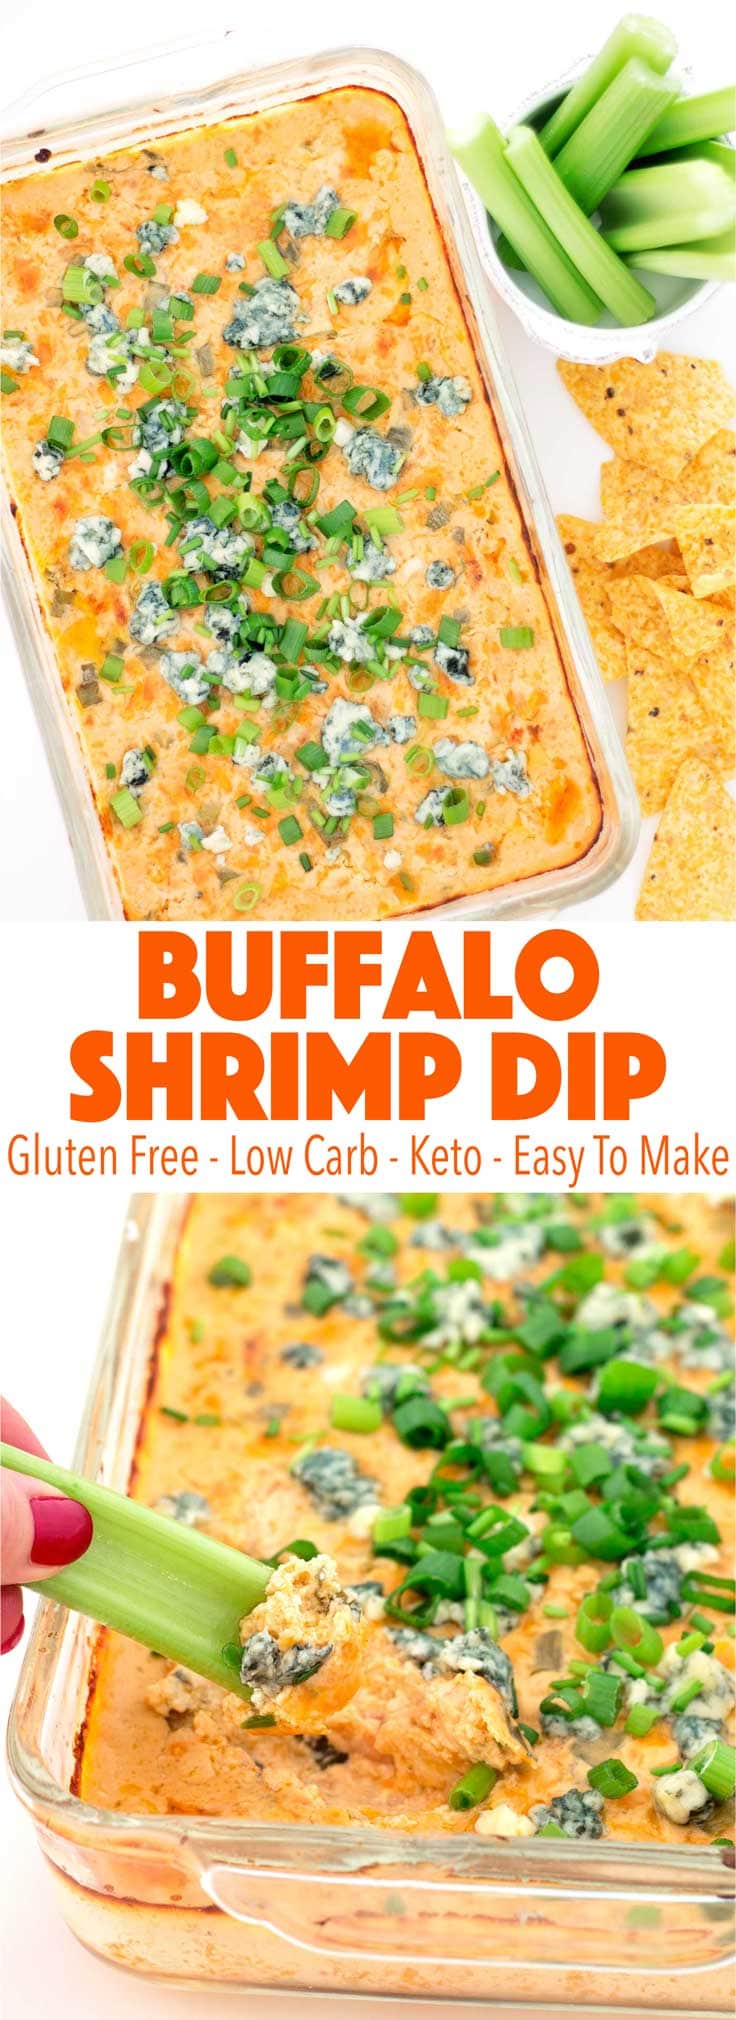 Buffalo dip made with shrimp! This game day recipe is perfect for your next party this football season. Easy to make, gluten free, low carb, and keto!